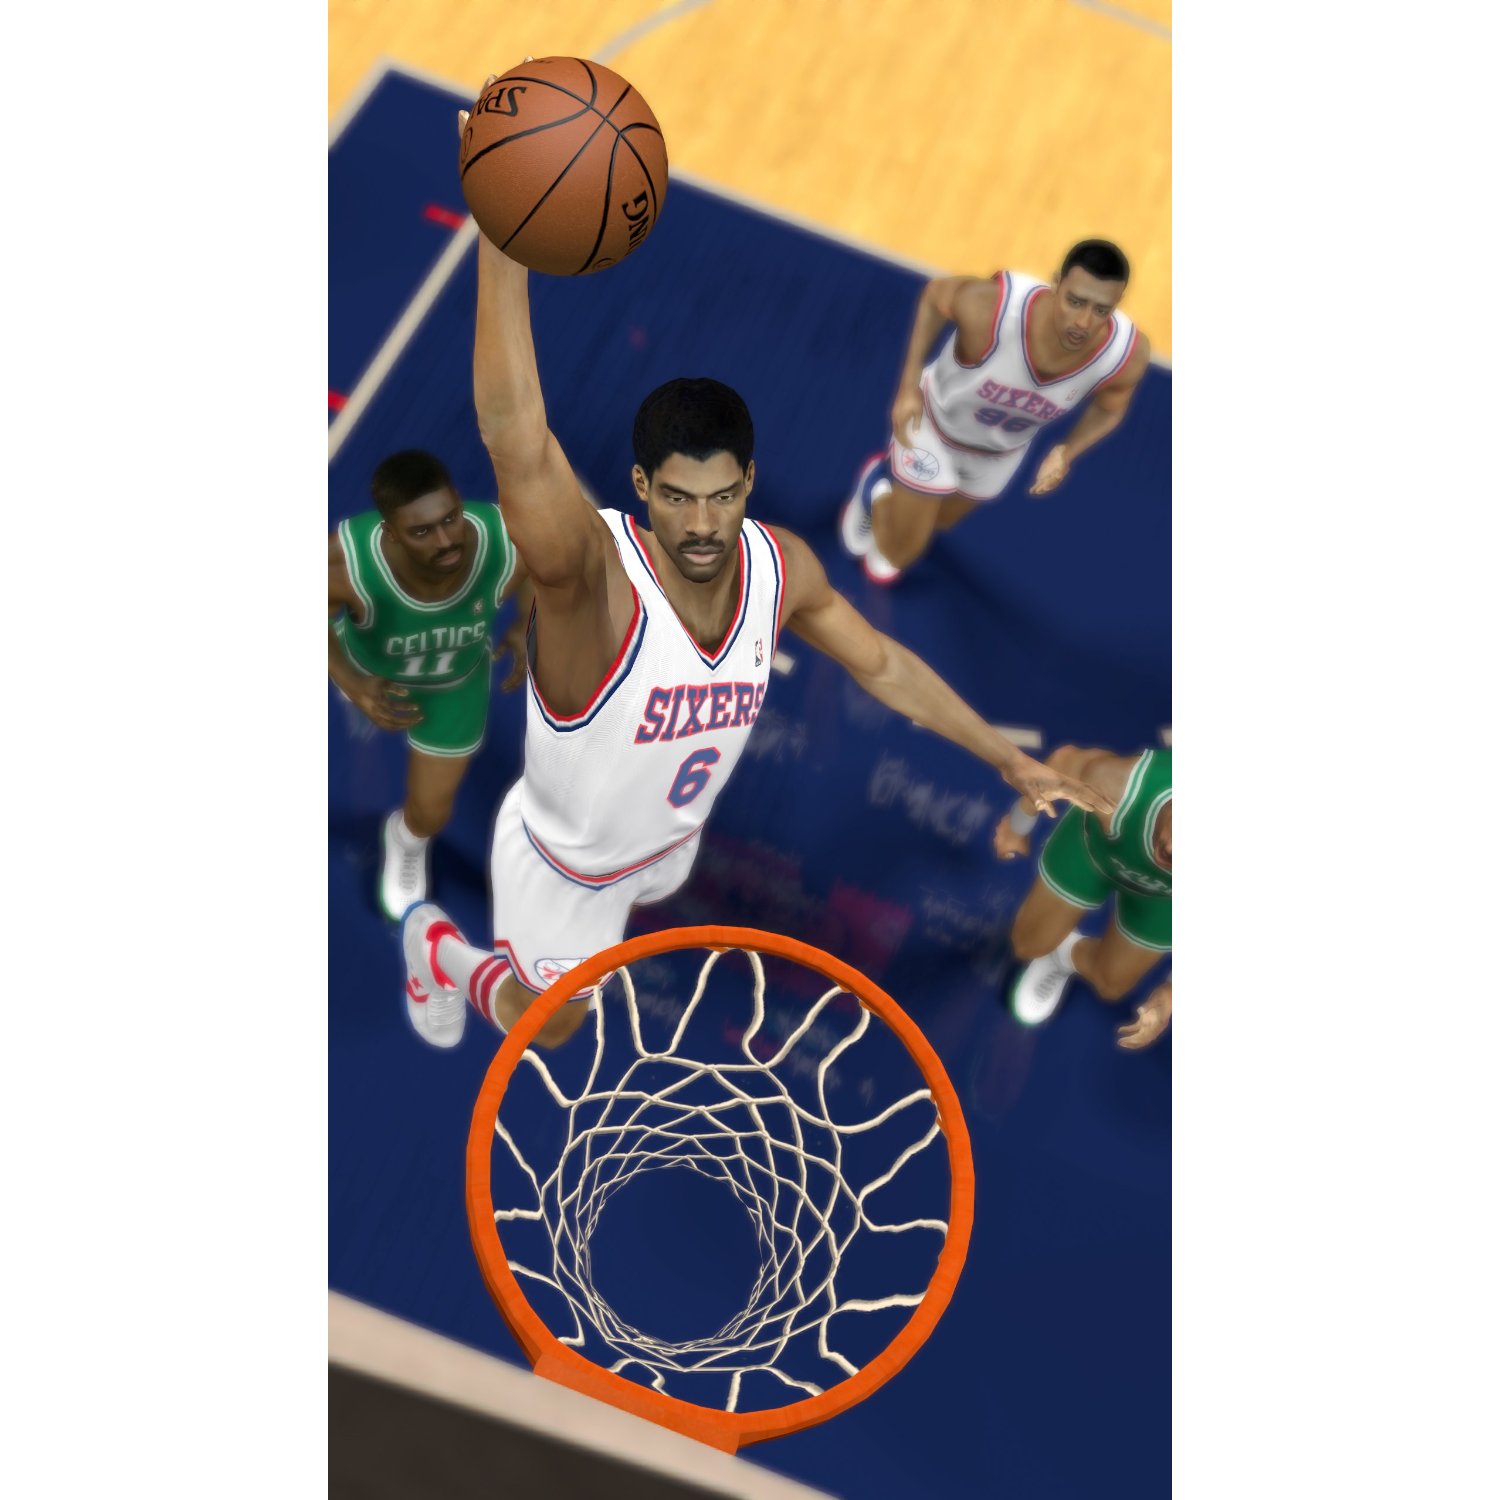 http://thetechjournal.com/wp-content/uploads/images/1109/1316953461-nba-2k12--game-for-preorder-now-2.jpg